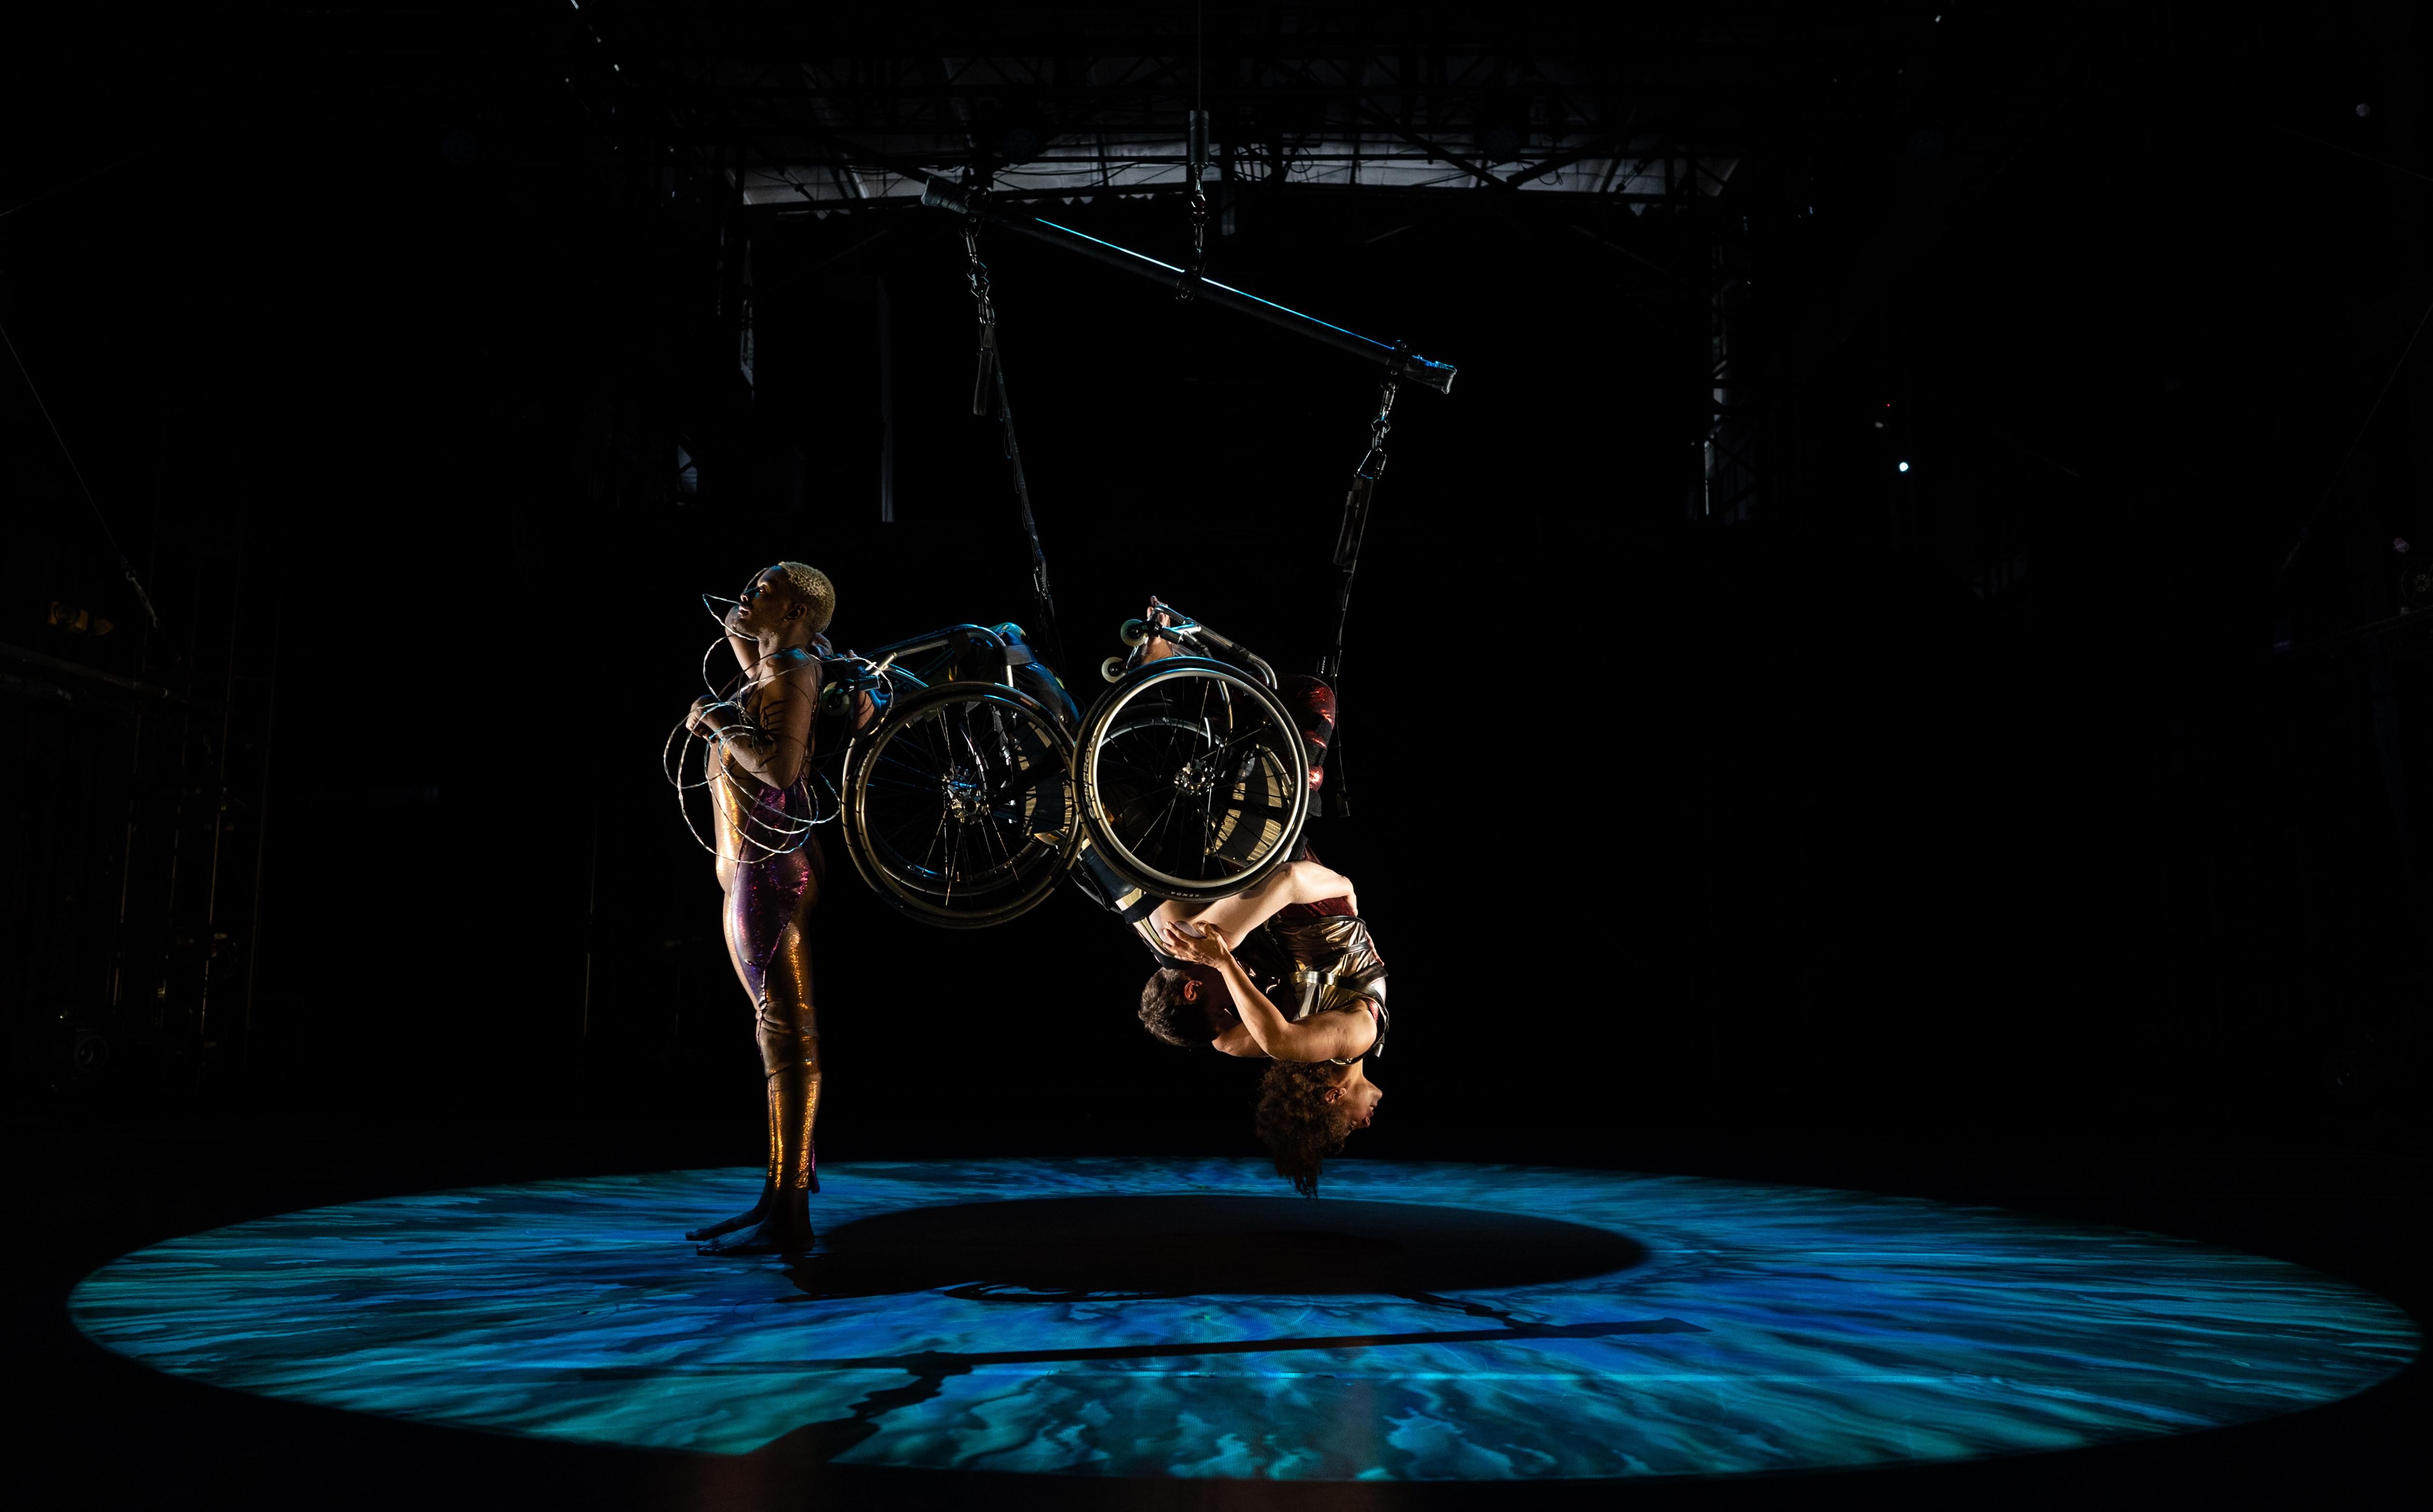 Three dancers appear onstage in a ring of dappled green and blue light. Jerron, a dark-skinned Black man with blonde hair, stands straight; he is wrapped in barbed wire, one arm resting on his chest, with his back to Alice and Laurel. Alice and Laurel hang upside down; their bodies and chairs entangled and becoming one. Laurel, a white woman with cropped hair, wraps her arms around Alice, a multiracial Black woman with coffee-colored skin and short curly hair. Alice arches and reaches her arms back, resting them on Laurel’s shoulders.